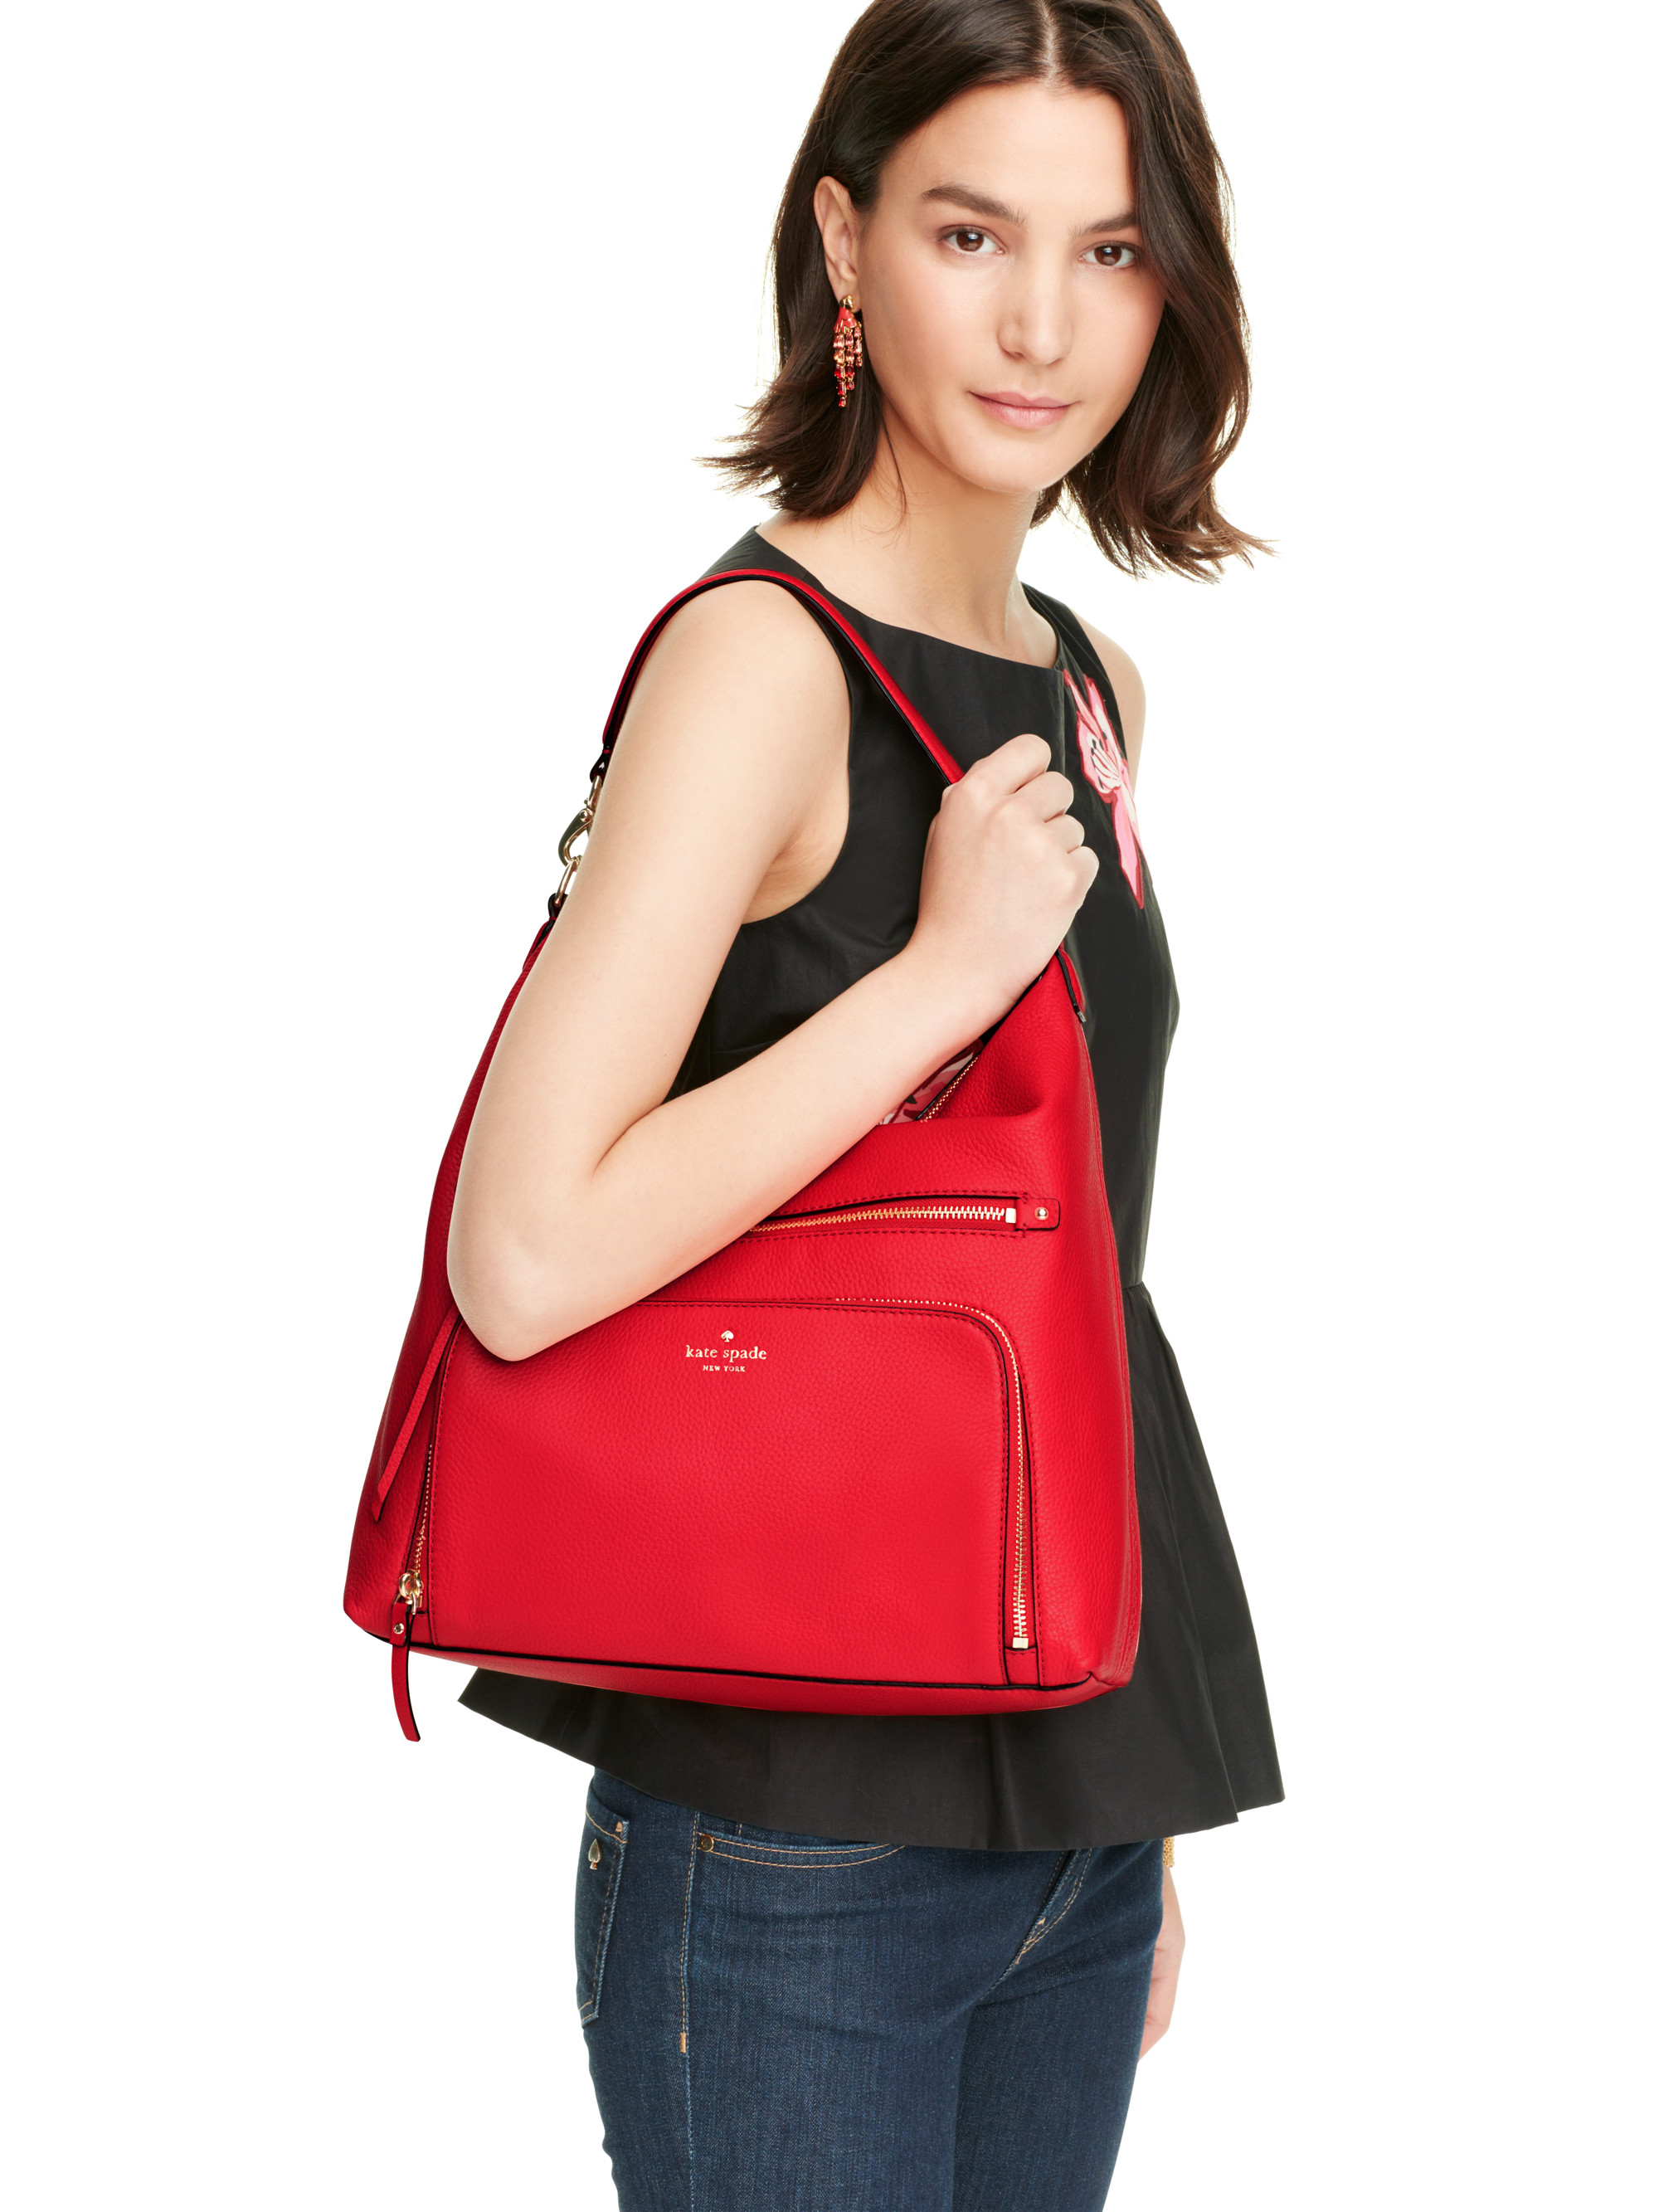 Lyst - Kate Spade New York Cobble Hill Lizzie Leather Bag in Red